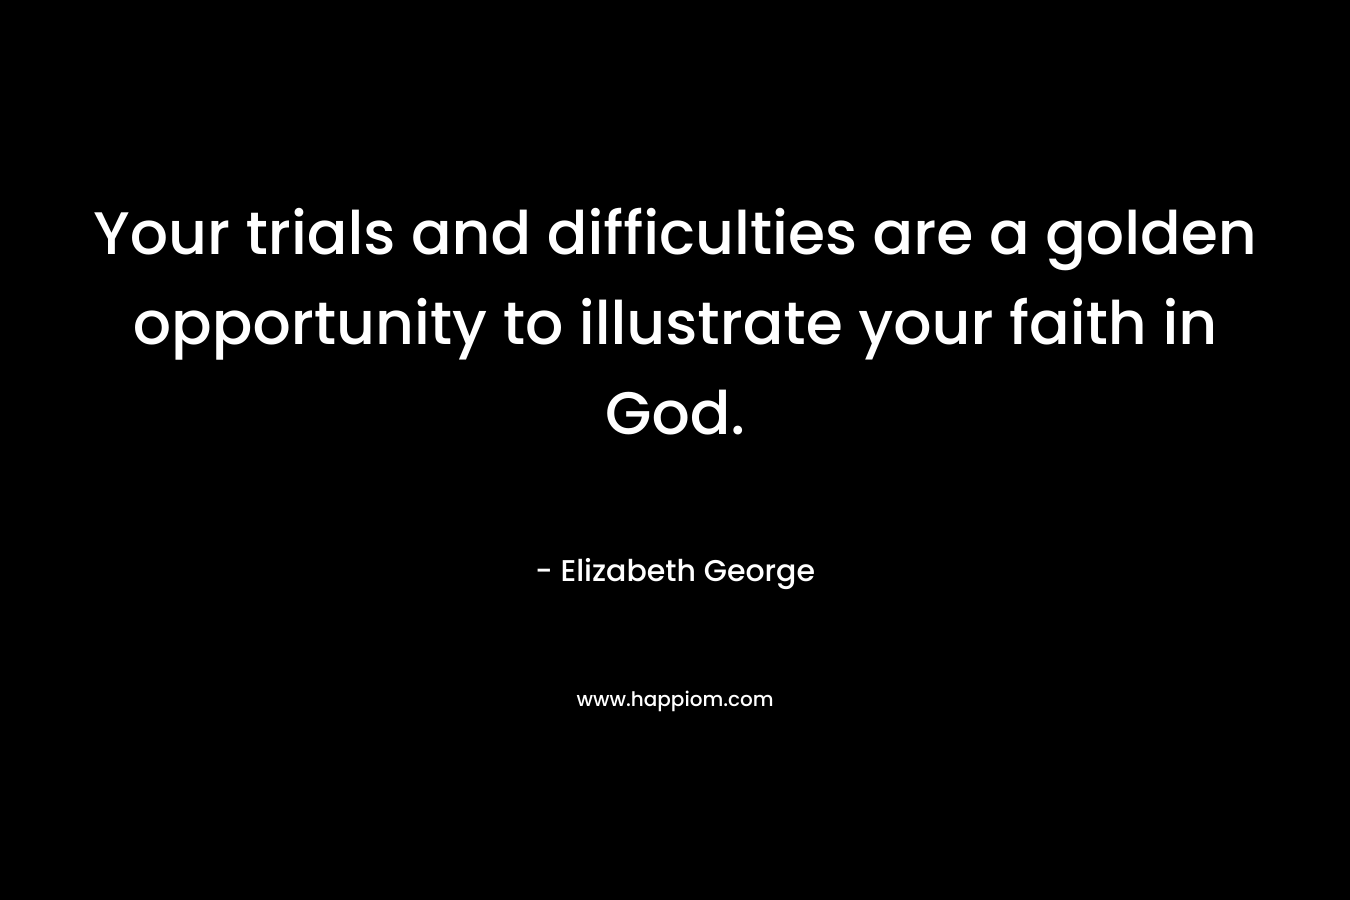 Your trials and difficulties are a golden opportunity to illustrate your faith in God. – Elizabeth George